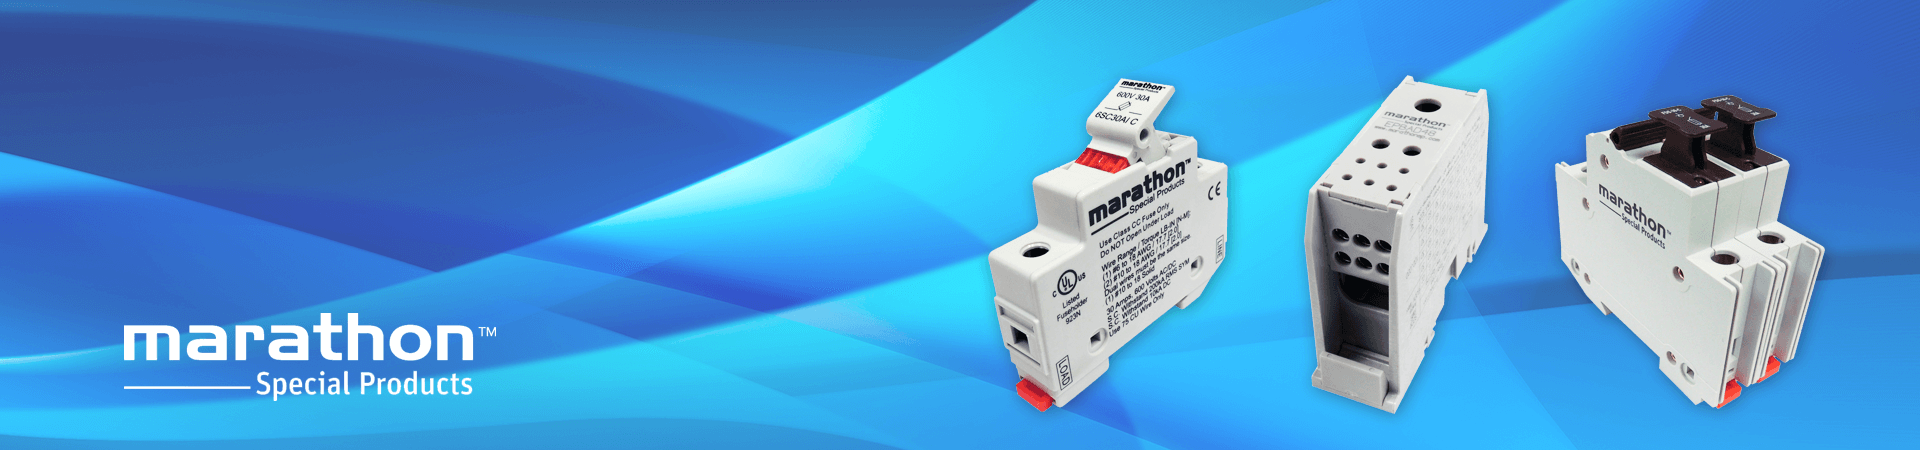 Power Blocks, Terminal Blocks, and Fuse Holders by Marathon Special Products